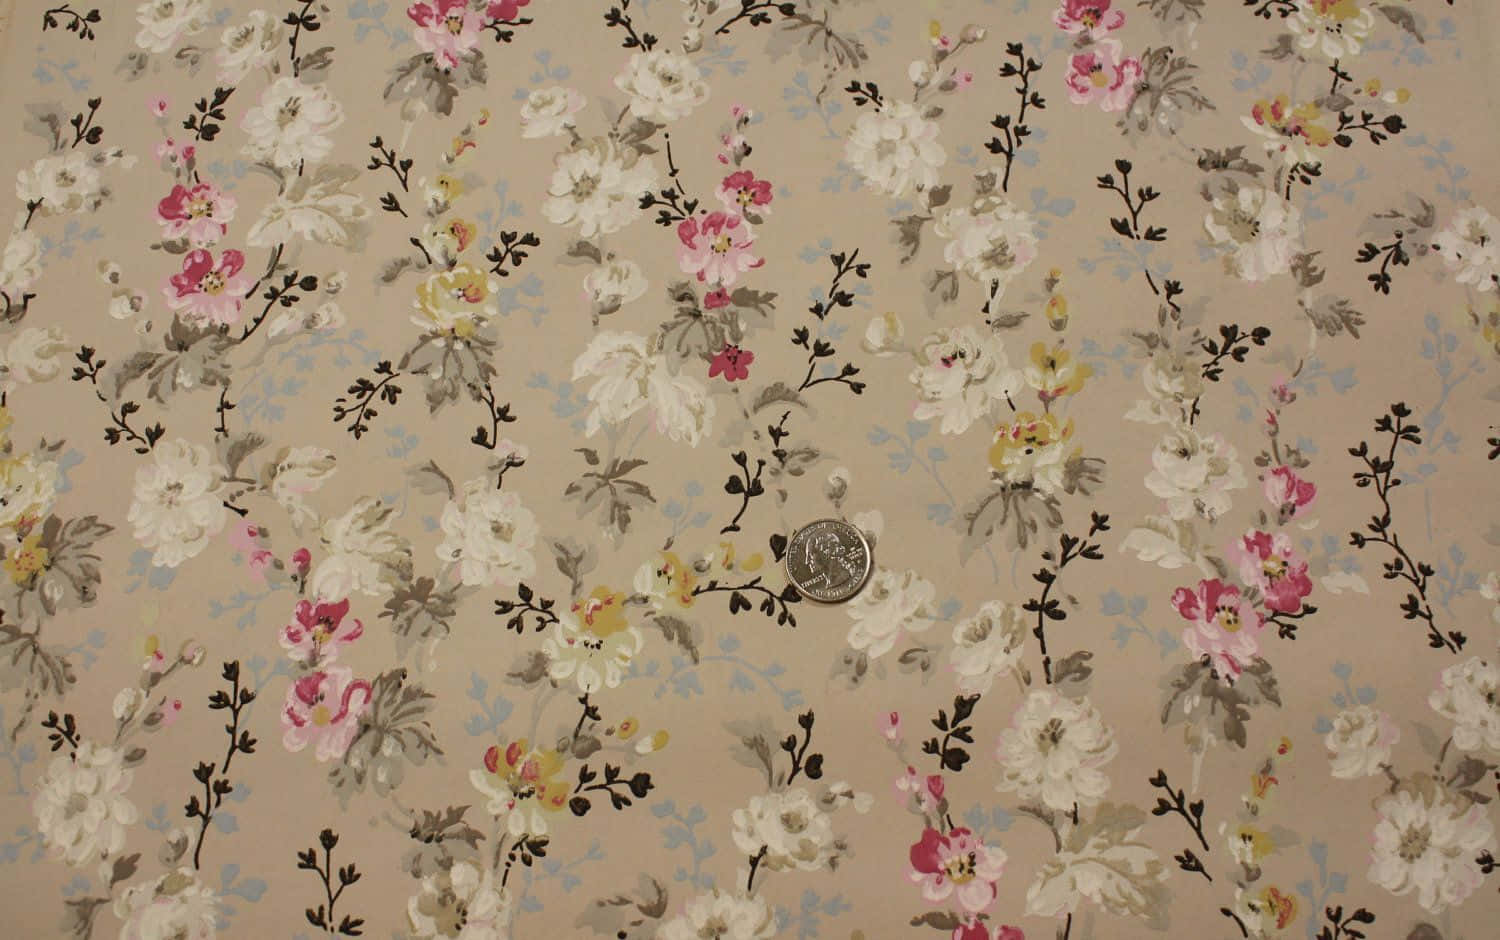 Vintage Floral Fabric Pattern1920s Wallpaper